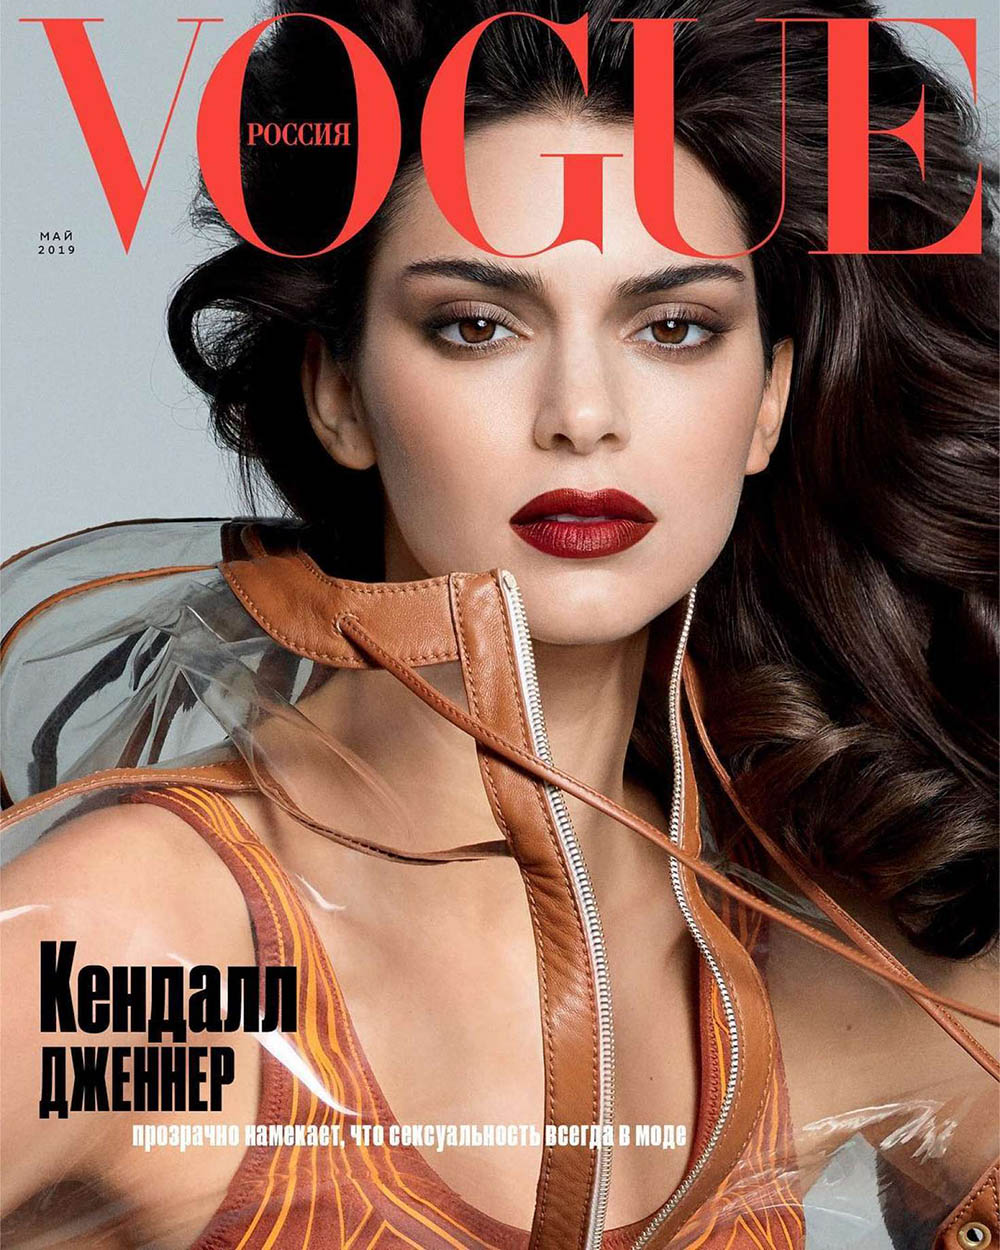 Kendall Jenner covers Vogue Russia May 2019 by Luigi & Iango